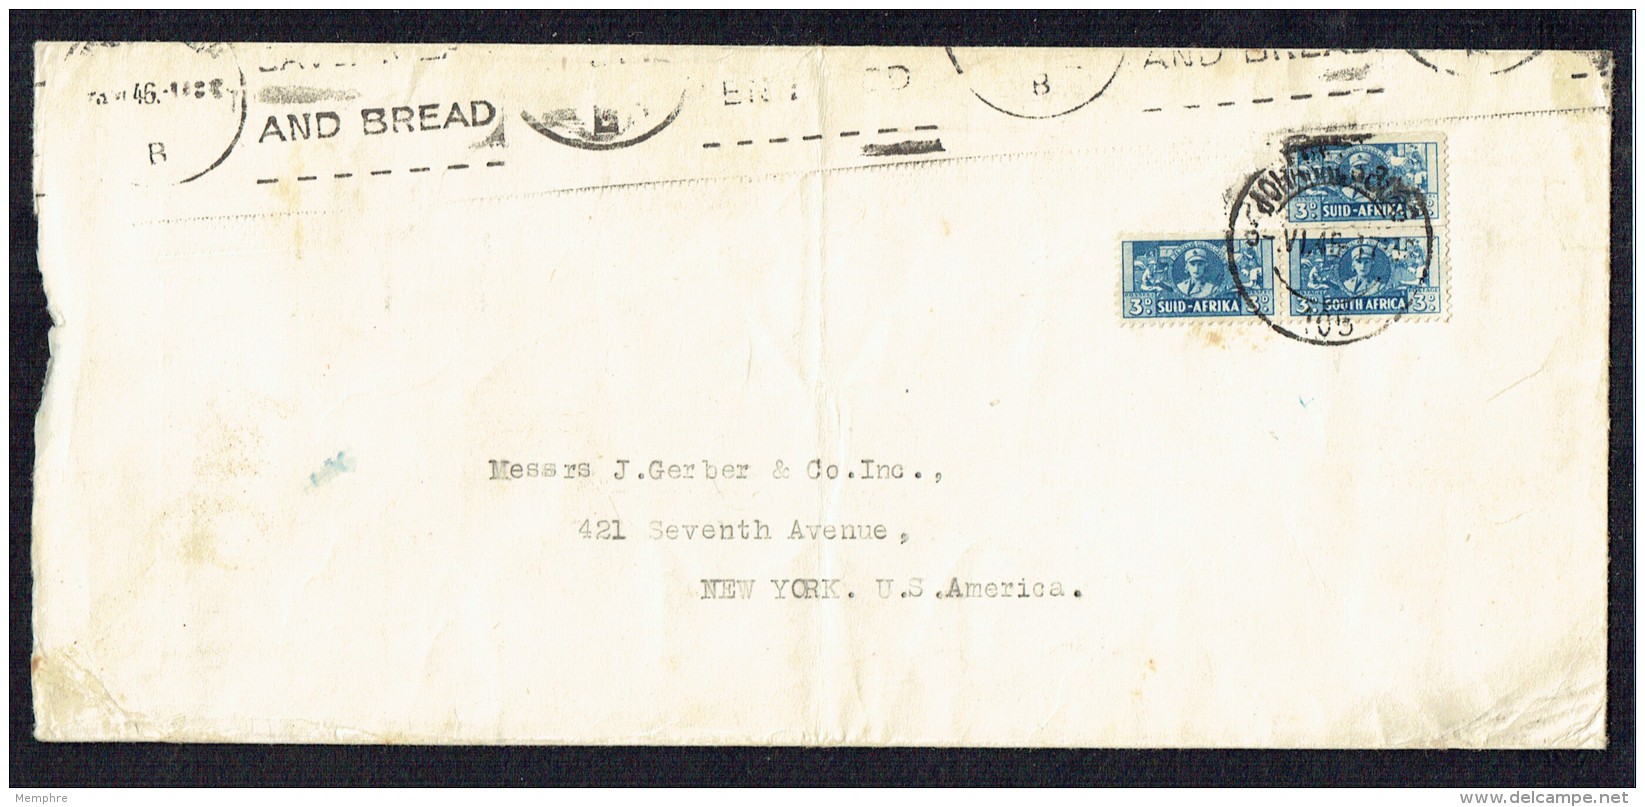 1946  Letter To USA  Women's Auxiliary Complete Unit Of 2 Plus Attached Single SG 101 - Storia Postale